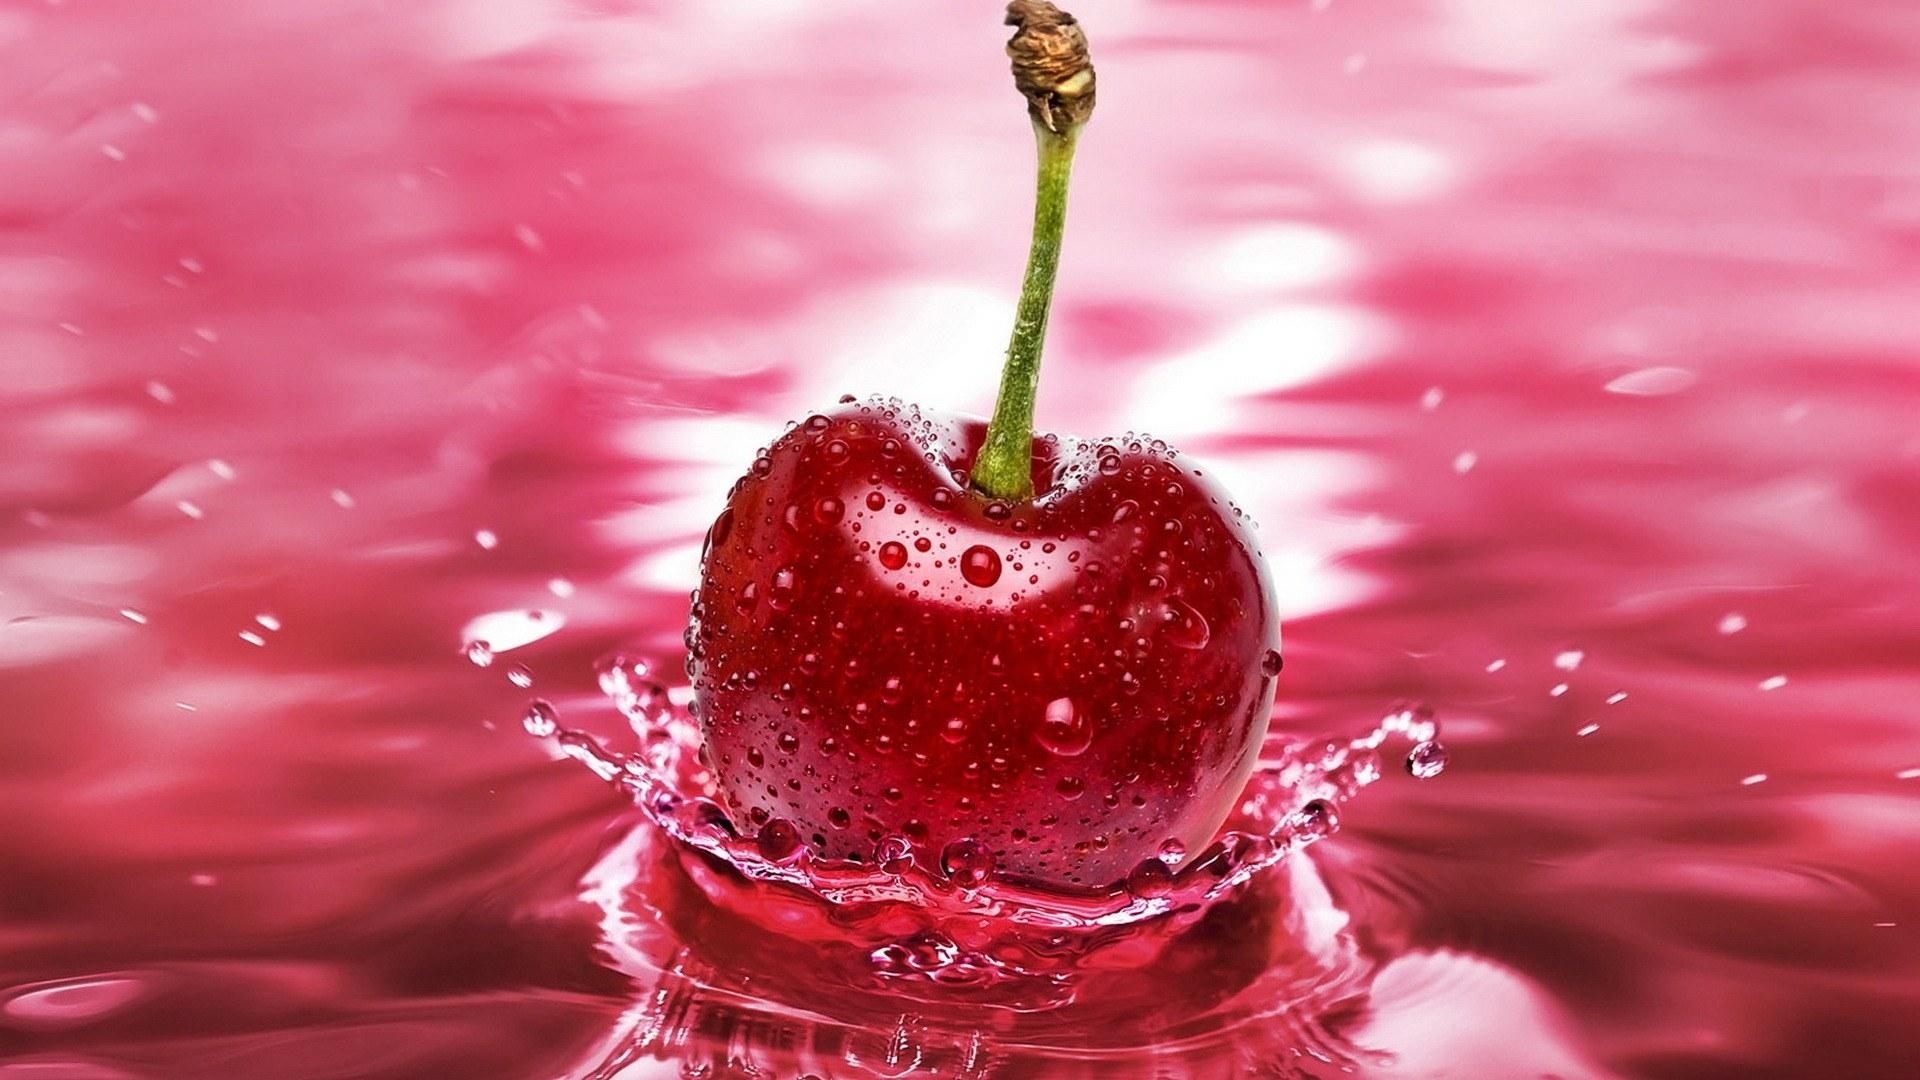 fruits, drops, water, food, cherry, red cellphone